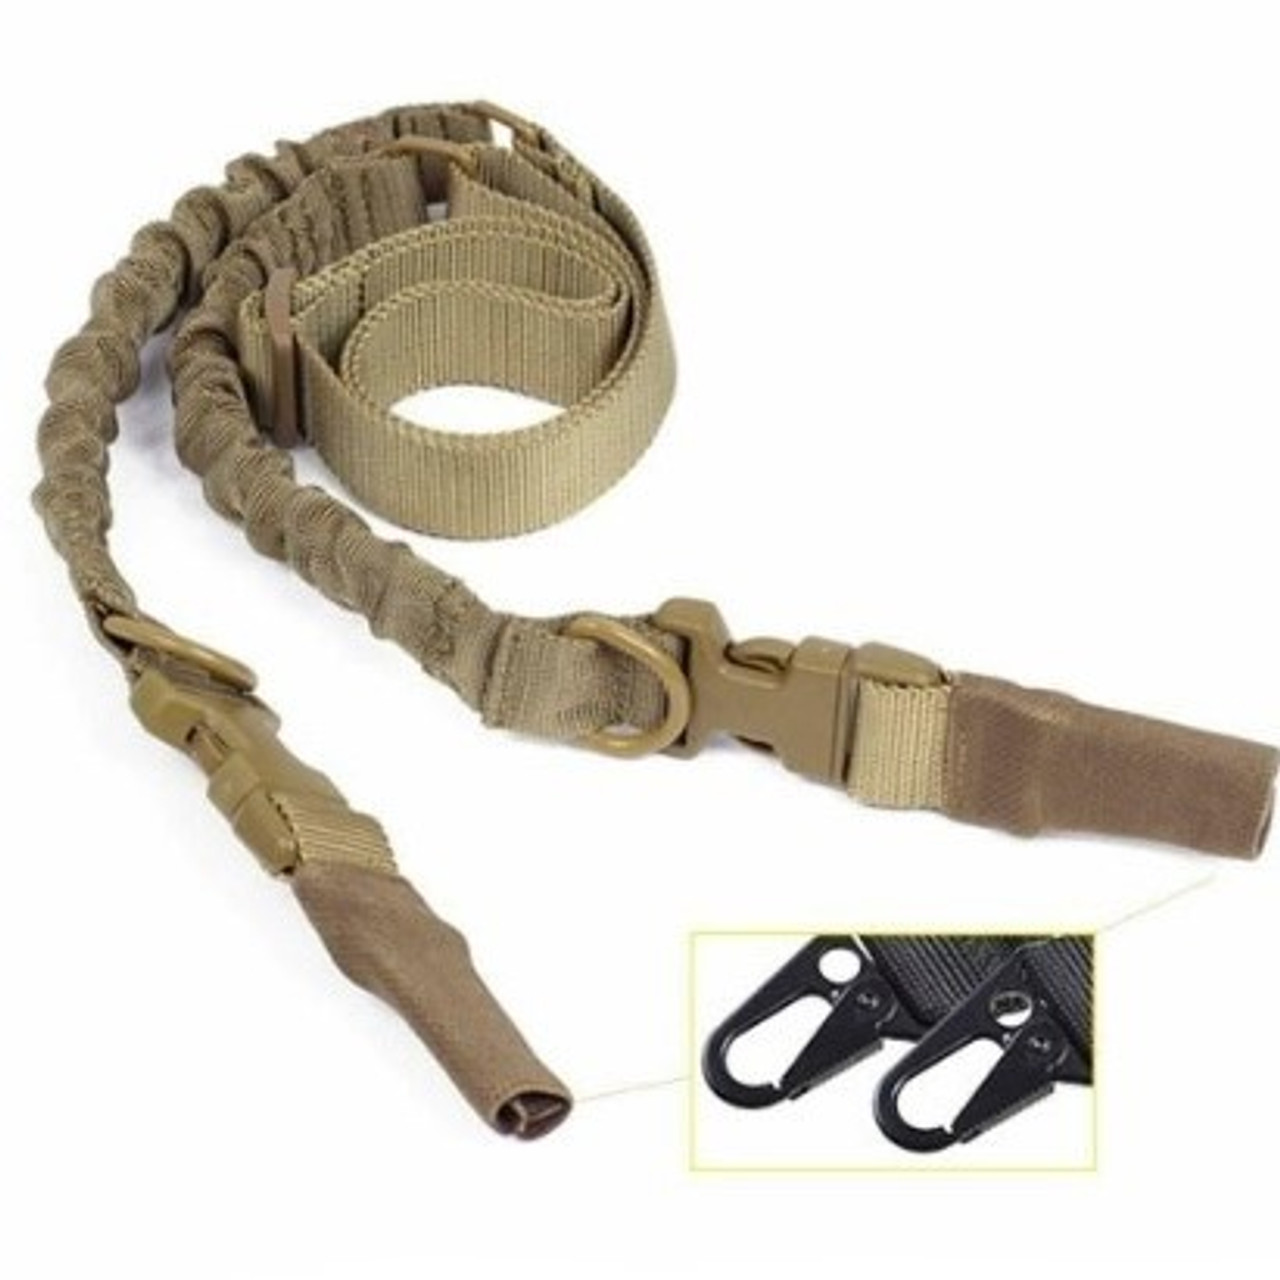 Tactical one 2 Single Point Bungee Rifle Sling Strap w/ Quick